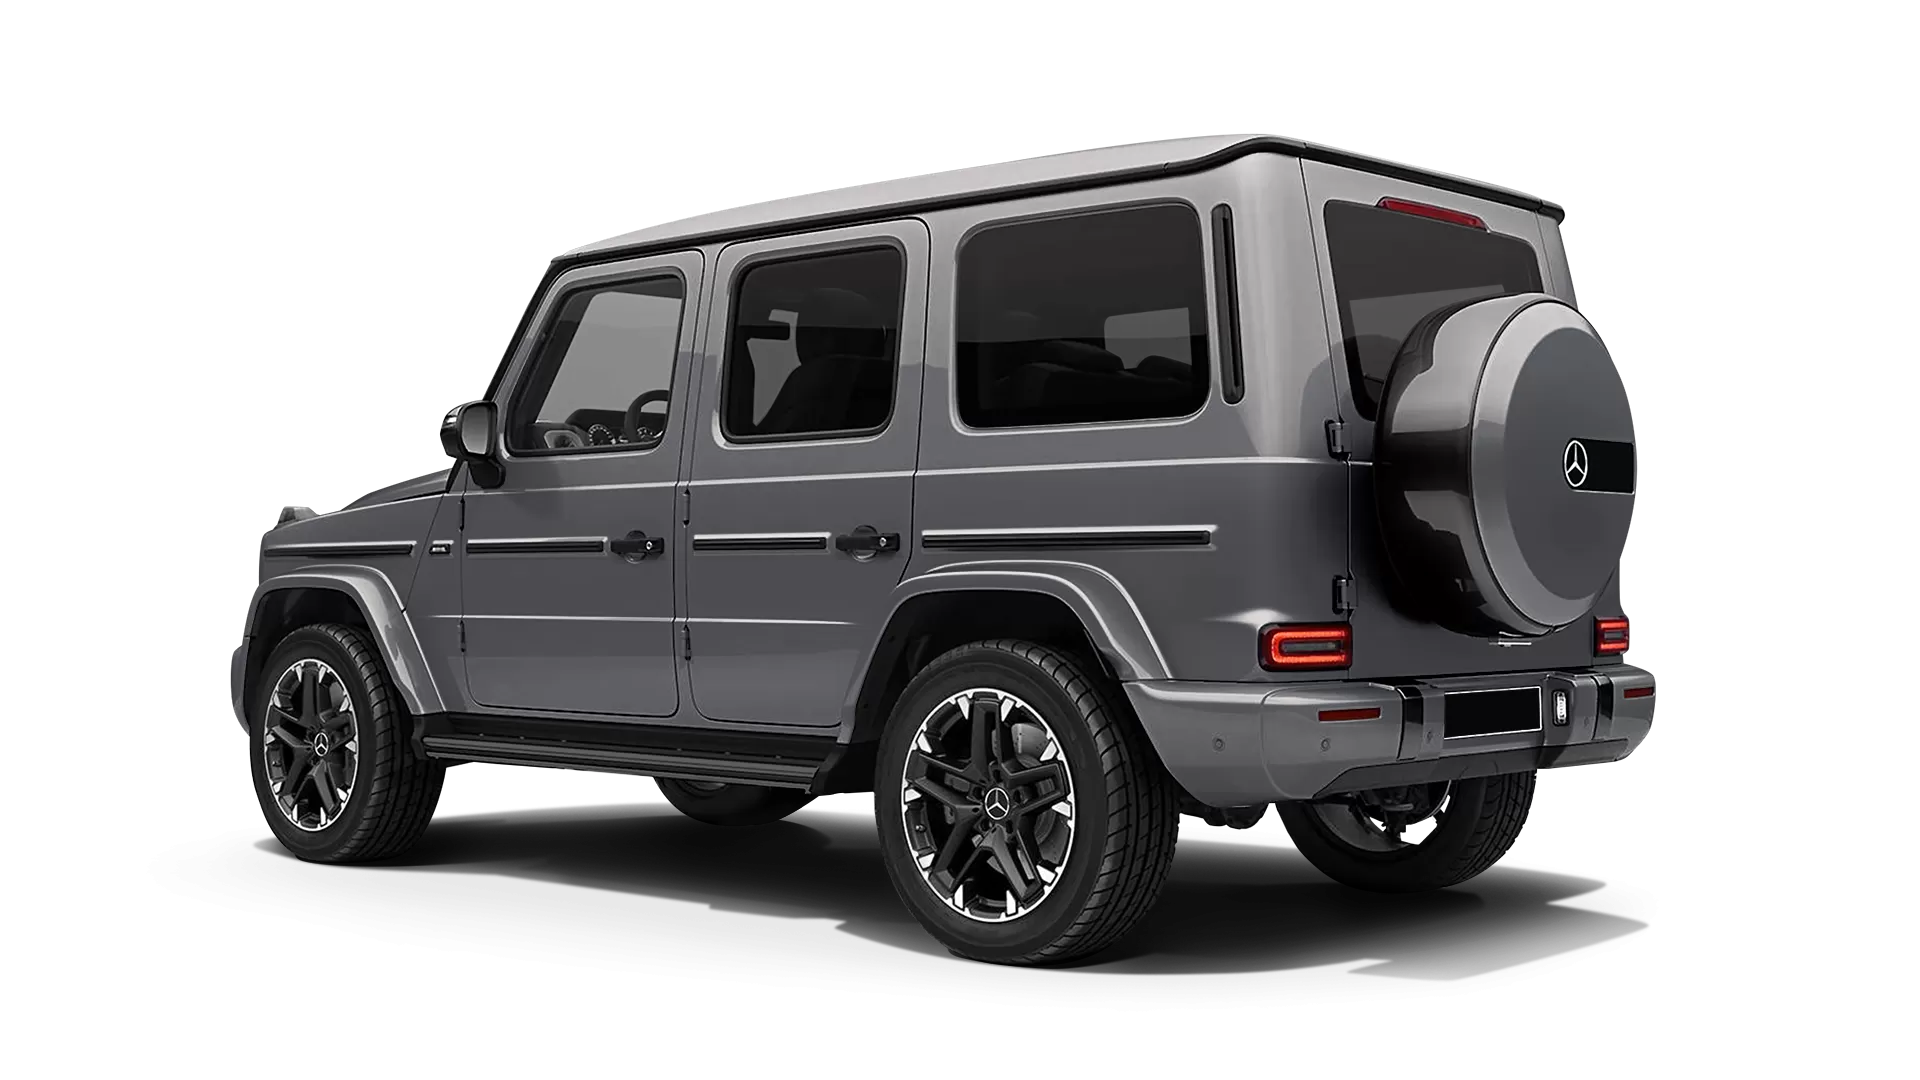 Mercedes G class W463 with painted body kit: rear view shown in Mojave Silver